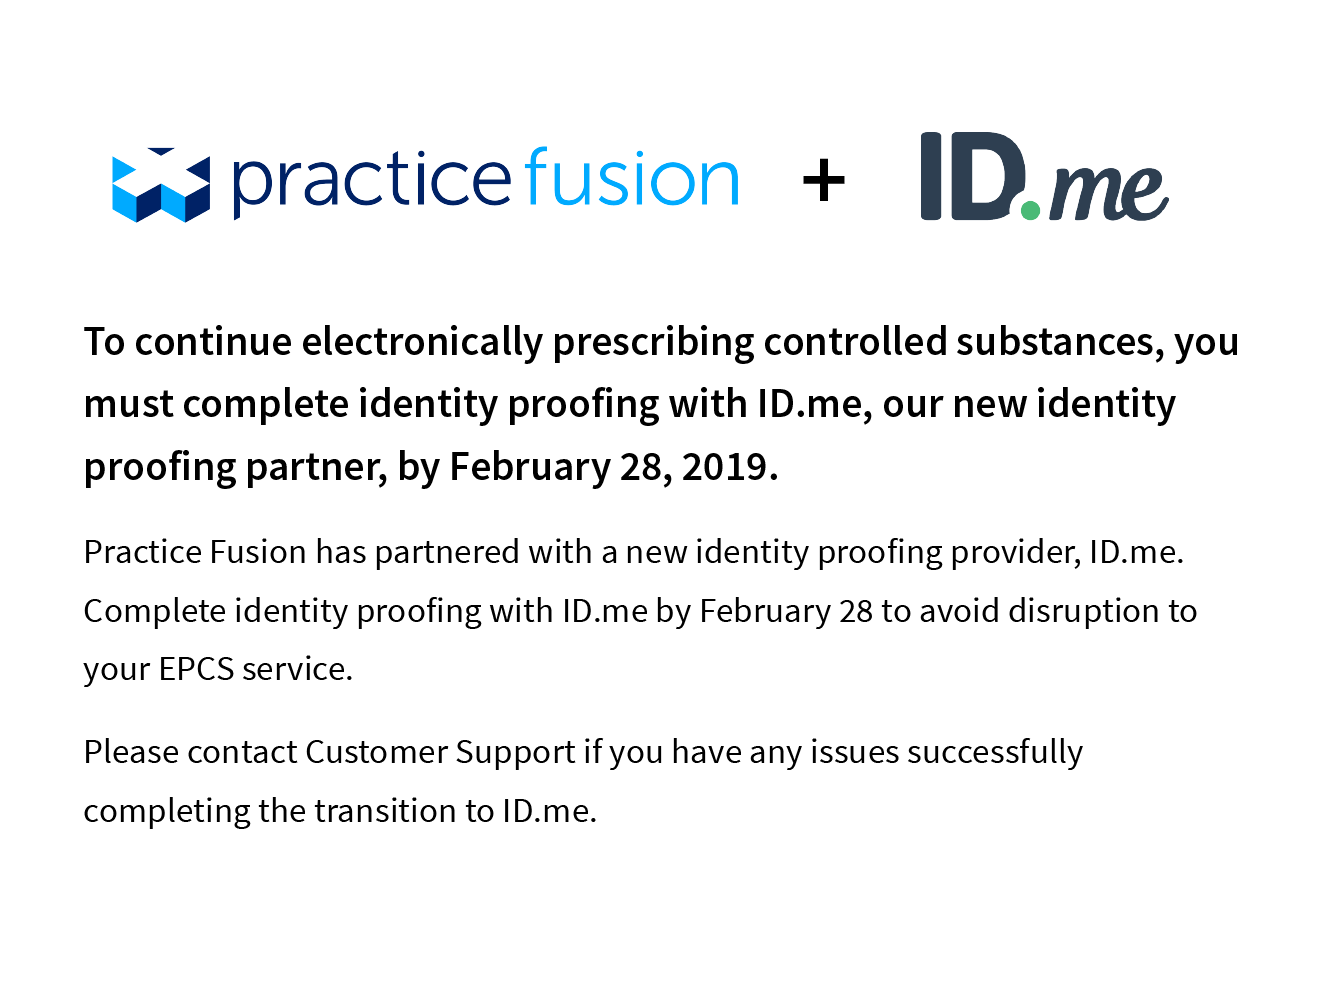 To continue electronically prescribing controlled substances, you must complete identity proofing with ID.me, our new identity proofing partner, by February 28,2019. Practice Fusion has partnered with a new identity proofing provider, ID.me. Compplete identity proofing with ID.me by February 28 to avoid disruption to your EPCS service. Please contact Customer Support if you have any issues successfully comnplete the transition to ID.me.